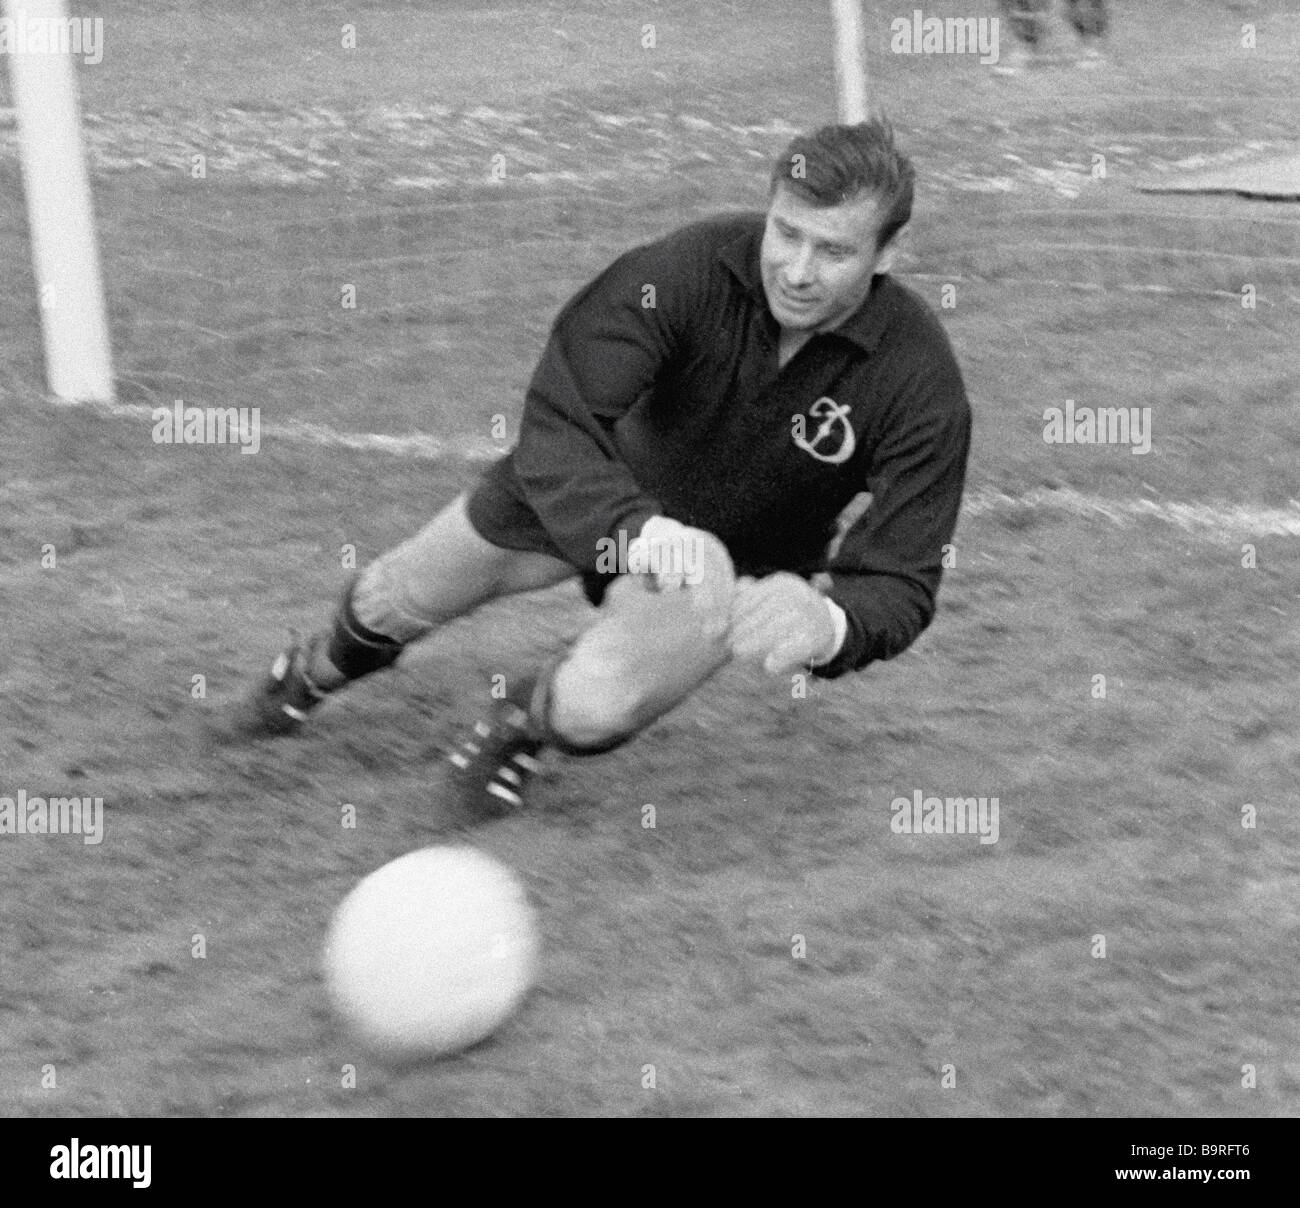 Goalie of the U S S R national team Lev Yashin catching football during ...